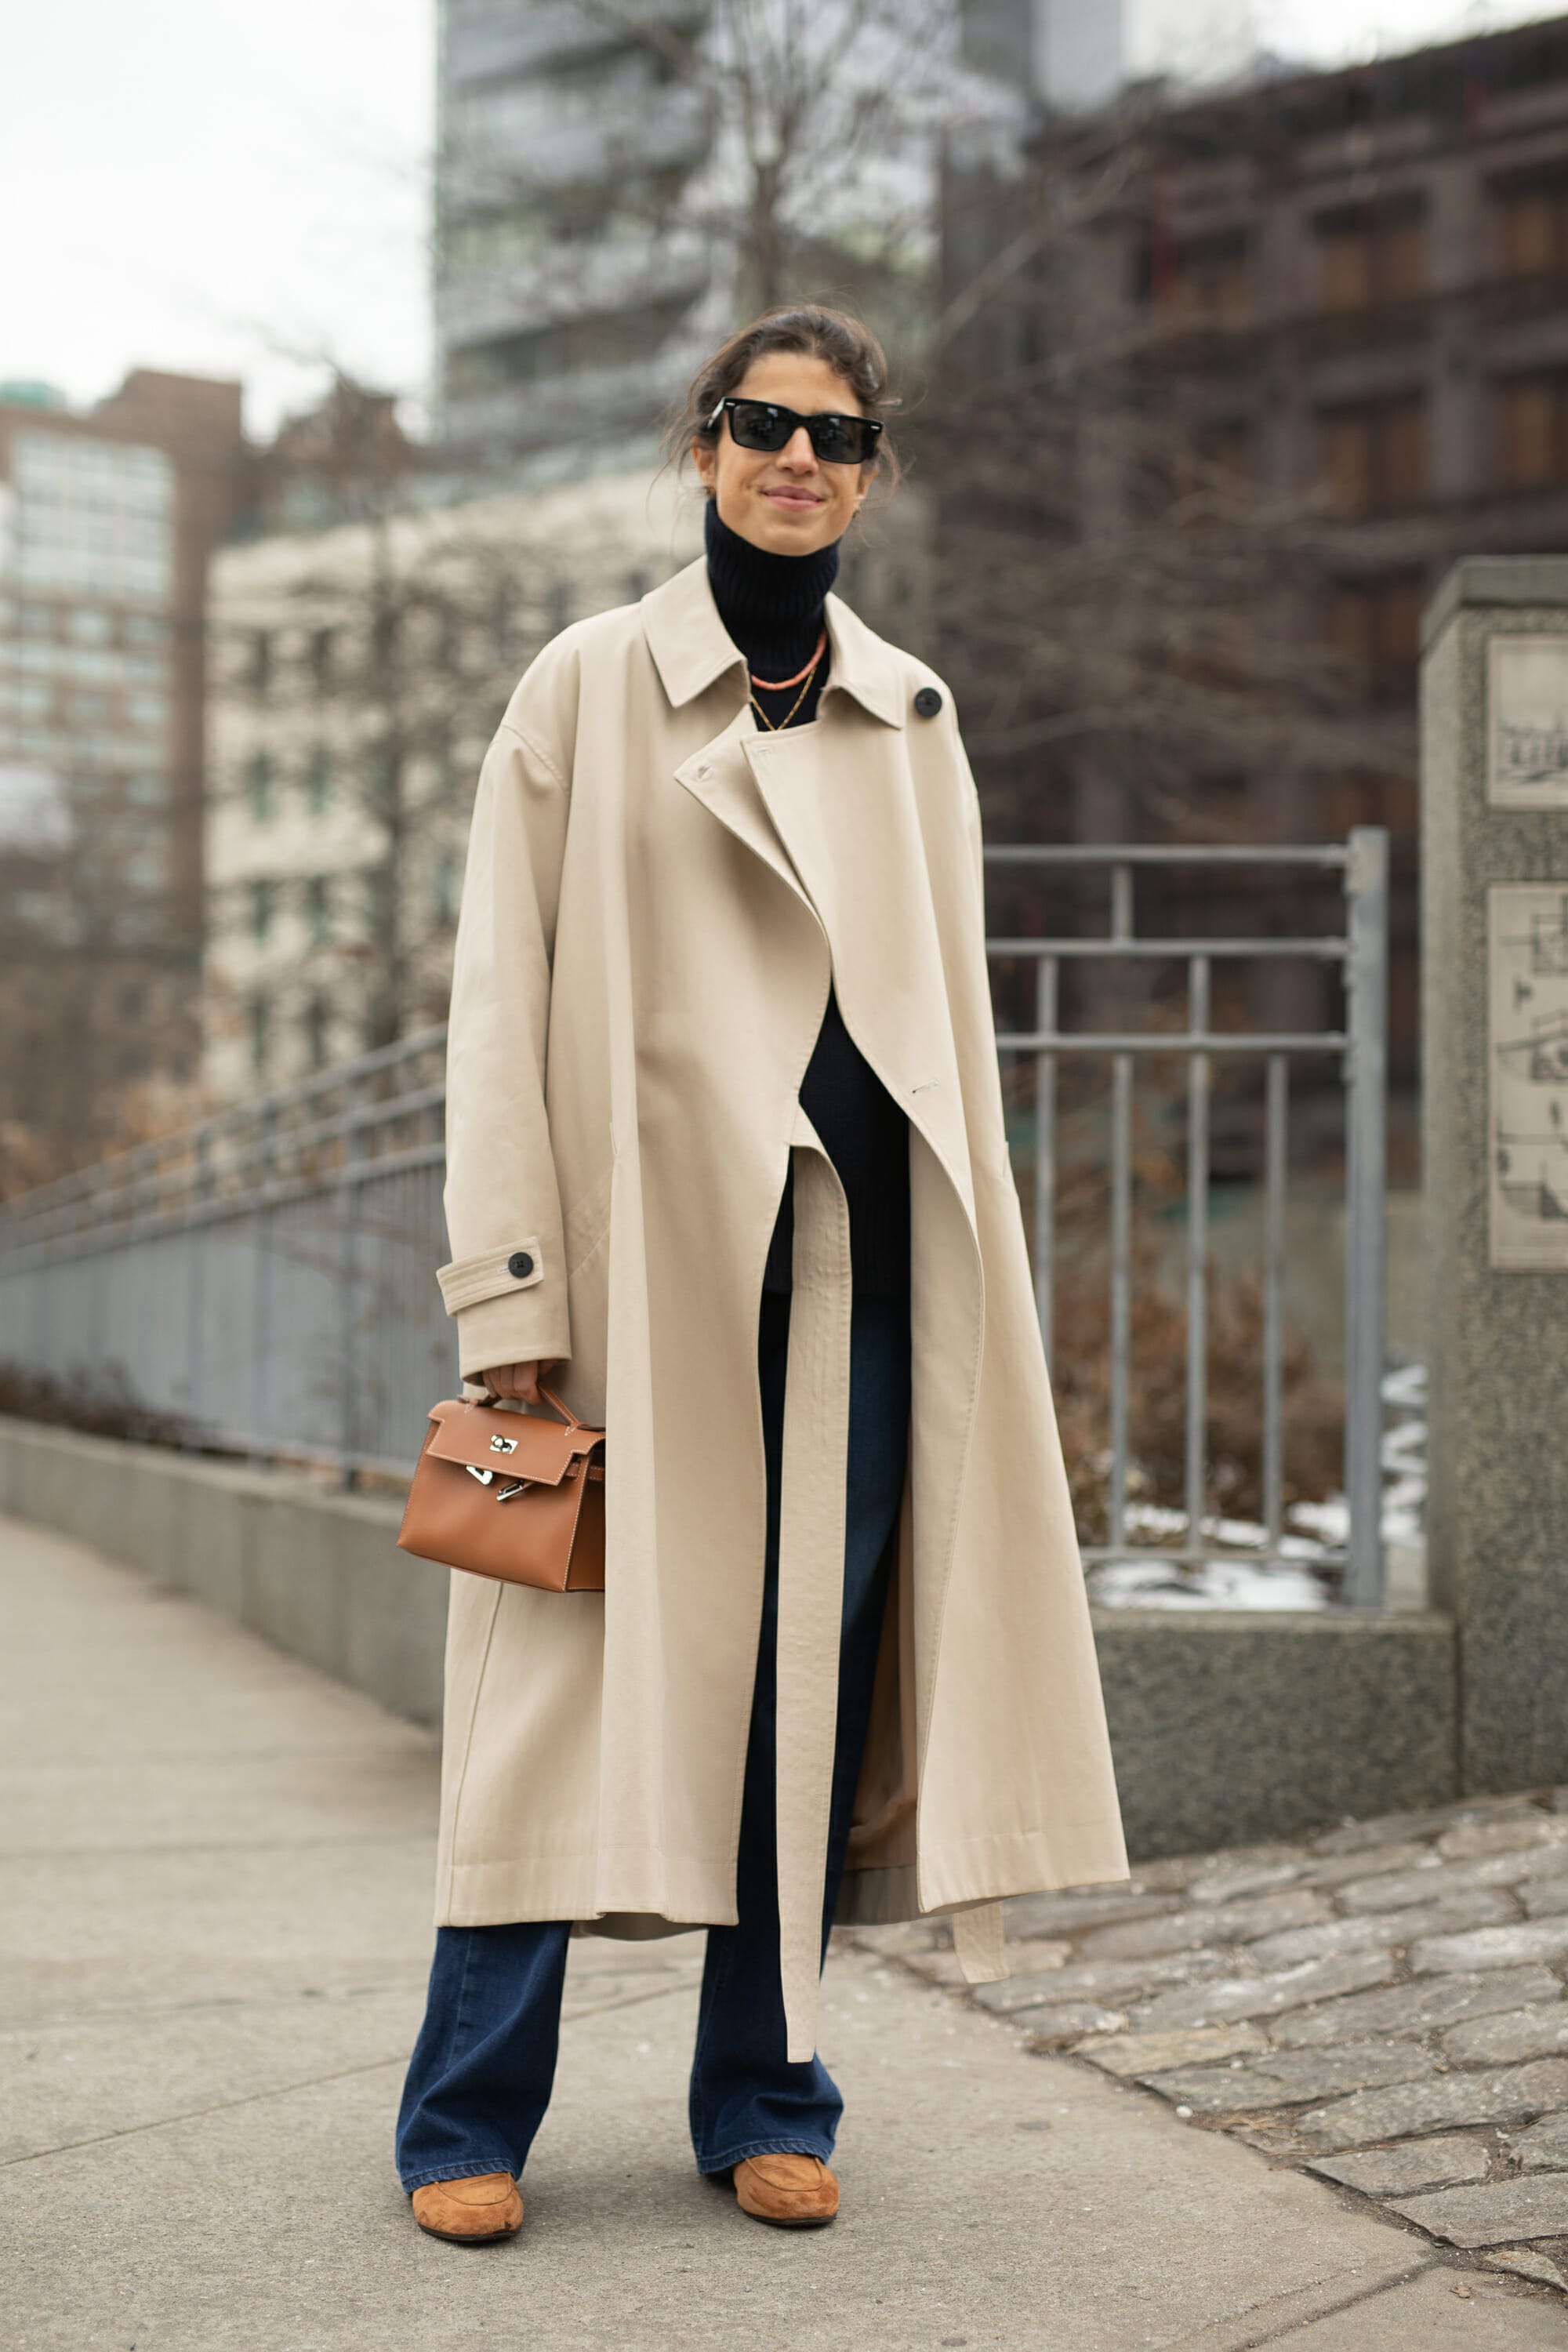 Officially, it's trench coat weather, so what makes one good?